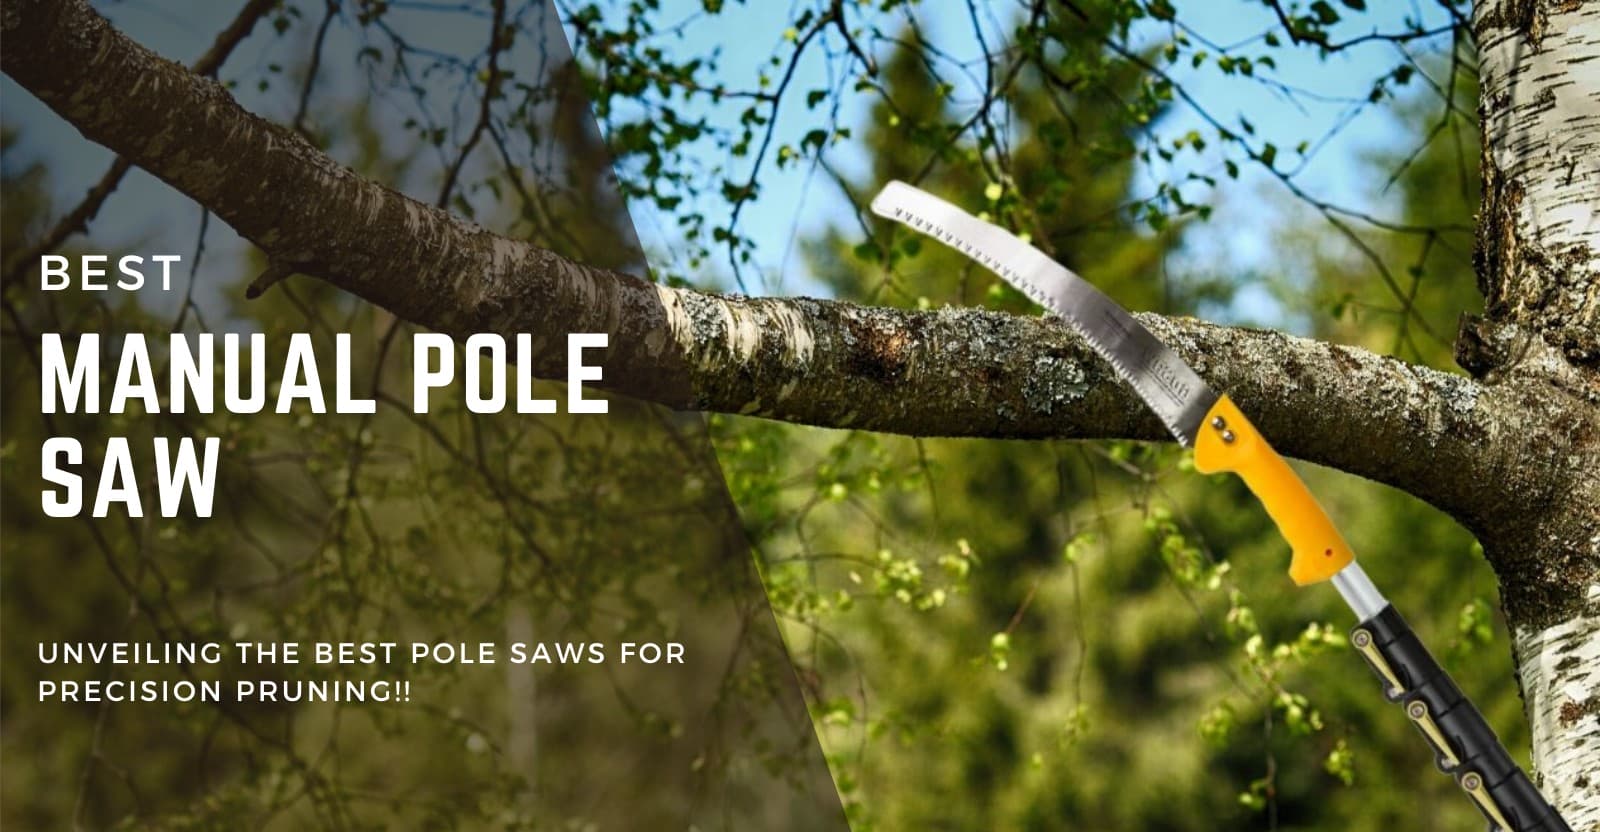 Best Manual Pole Saw Review